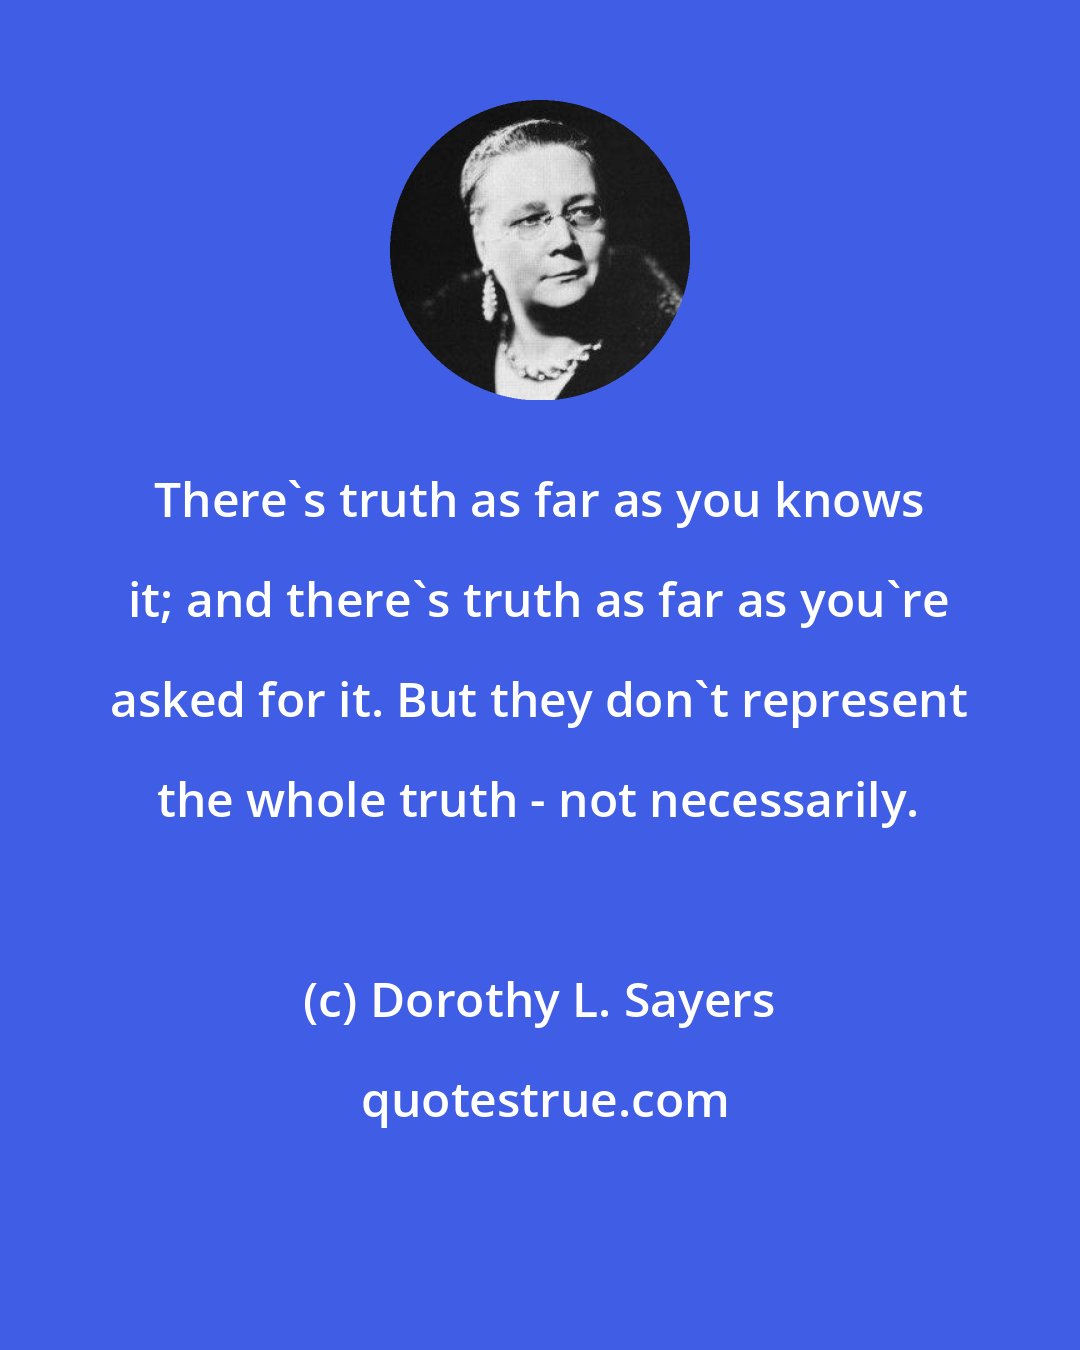 Dorothy L. Sayers: There's truth as far as you knows it; and there's truth as far as you're asked for it. But they don't represent the whole truth - not necessarily.